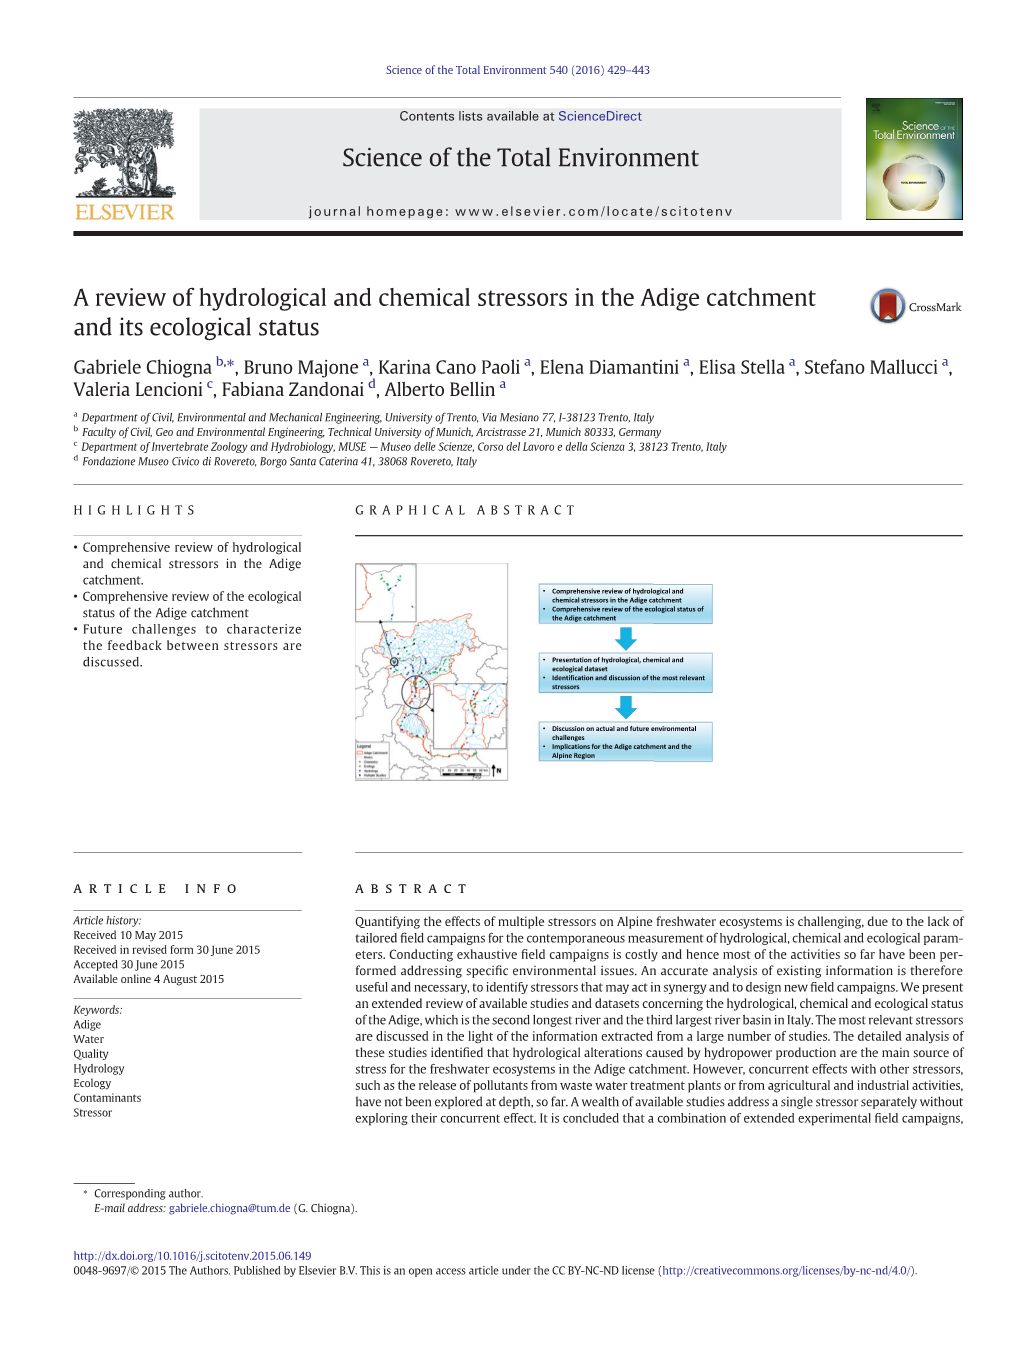 A Review of Hydrological and Chemical Stressors in the Adige Catchment and Its Ecological Status